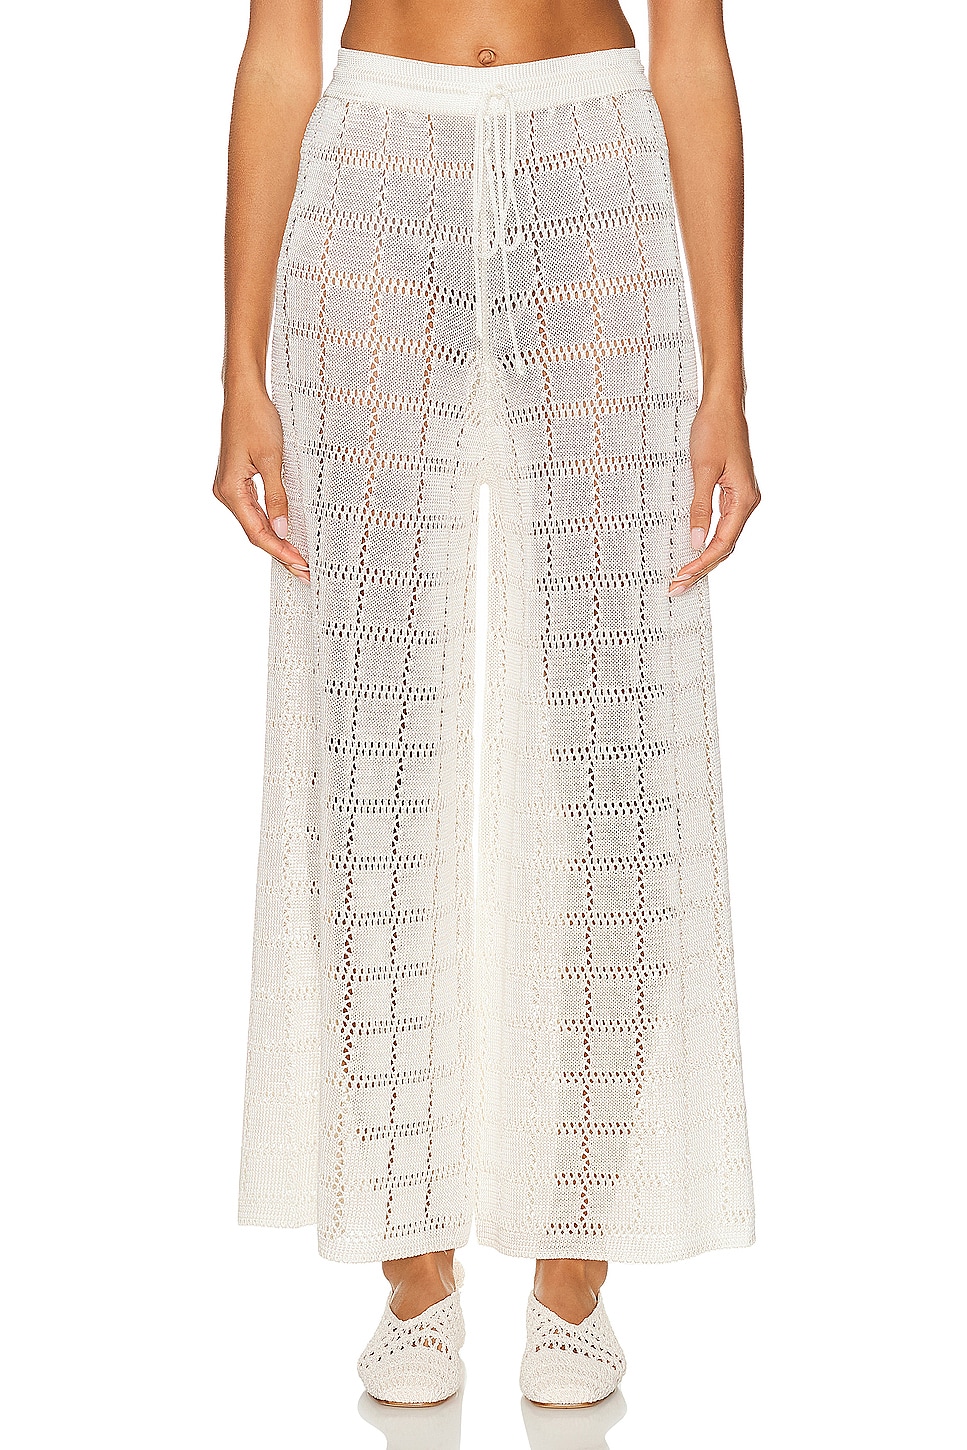 Image 1 of Calle Del Mar Crochet Patchwork Pant in Natural